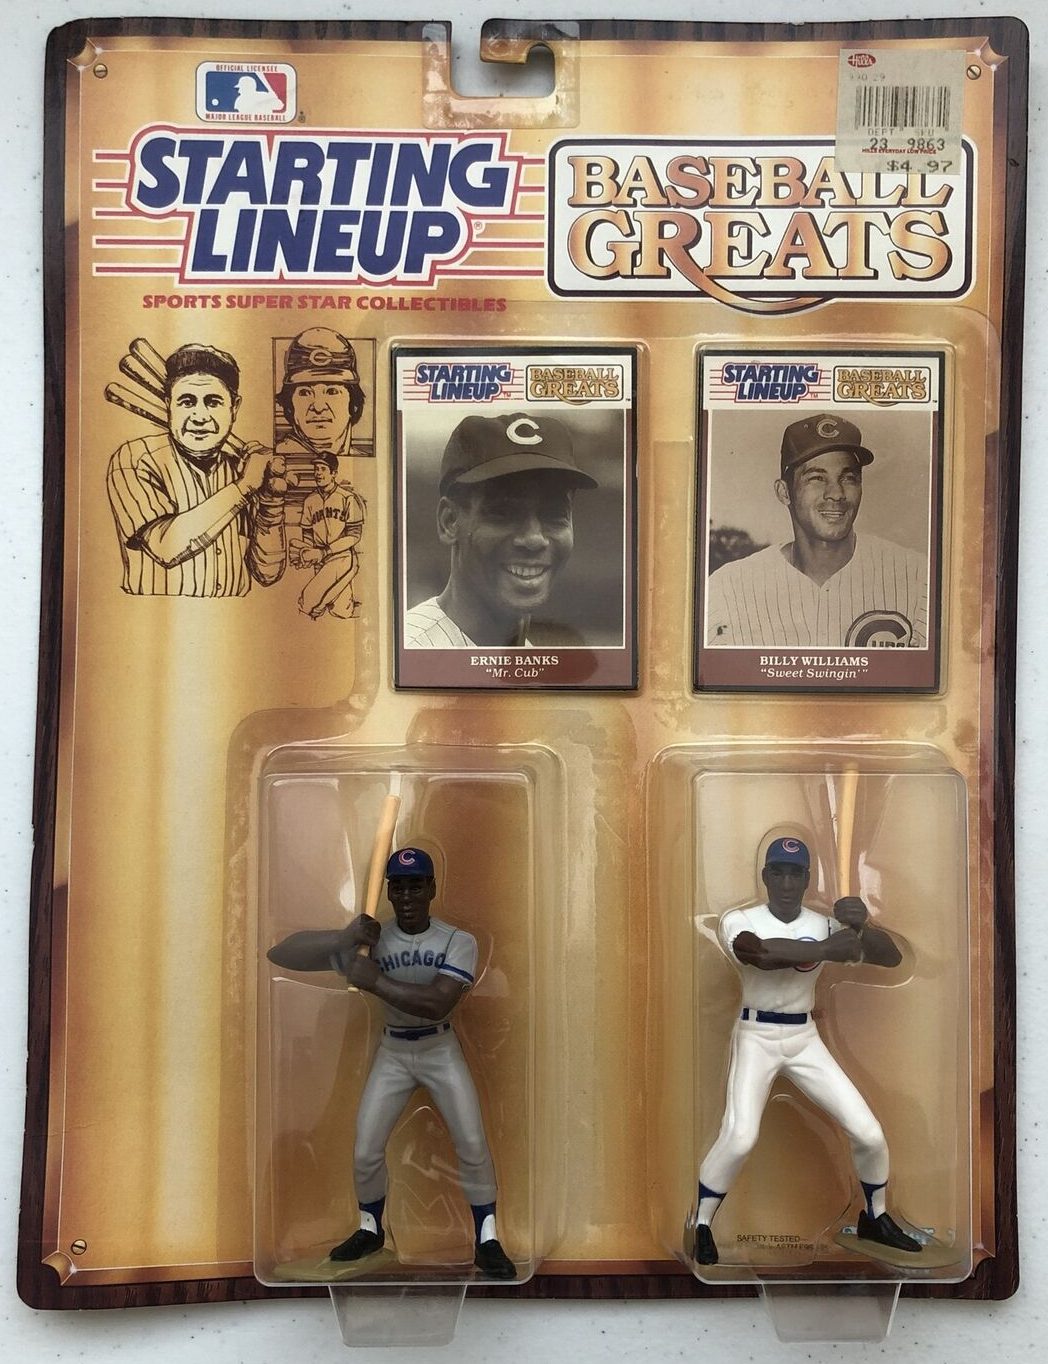 1989 Starting Lineup Baseball Greats Ernie Banks and Billy Williams 